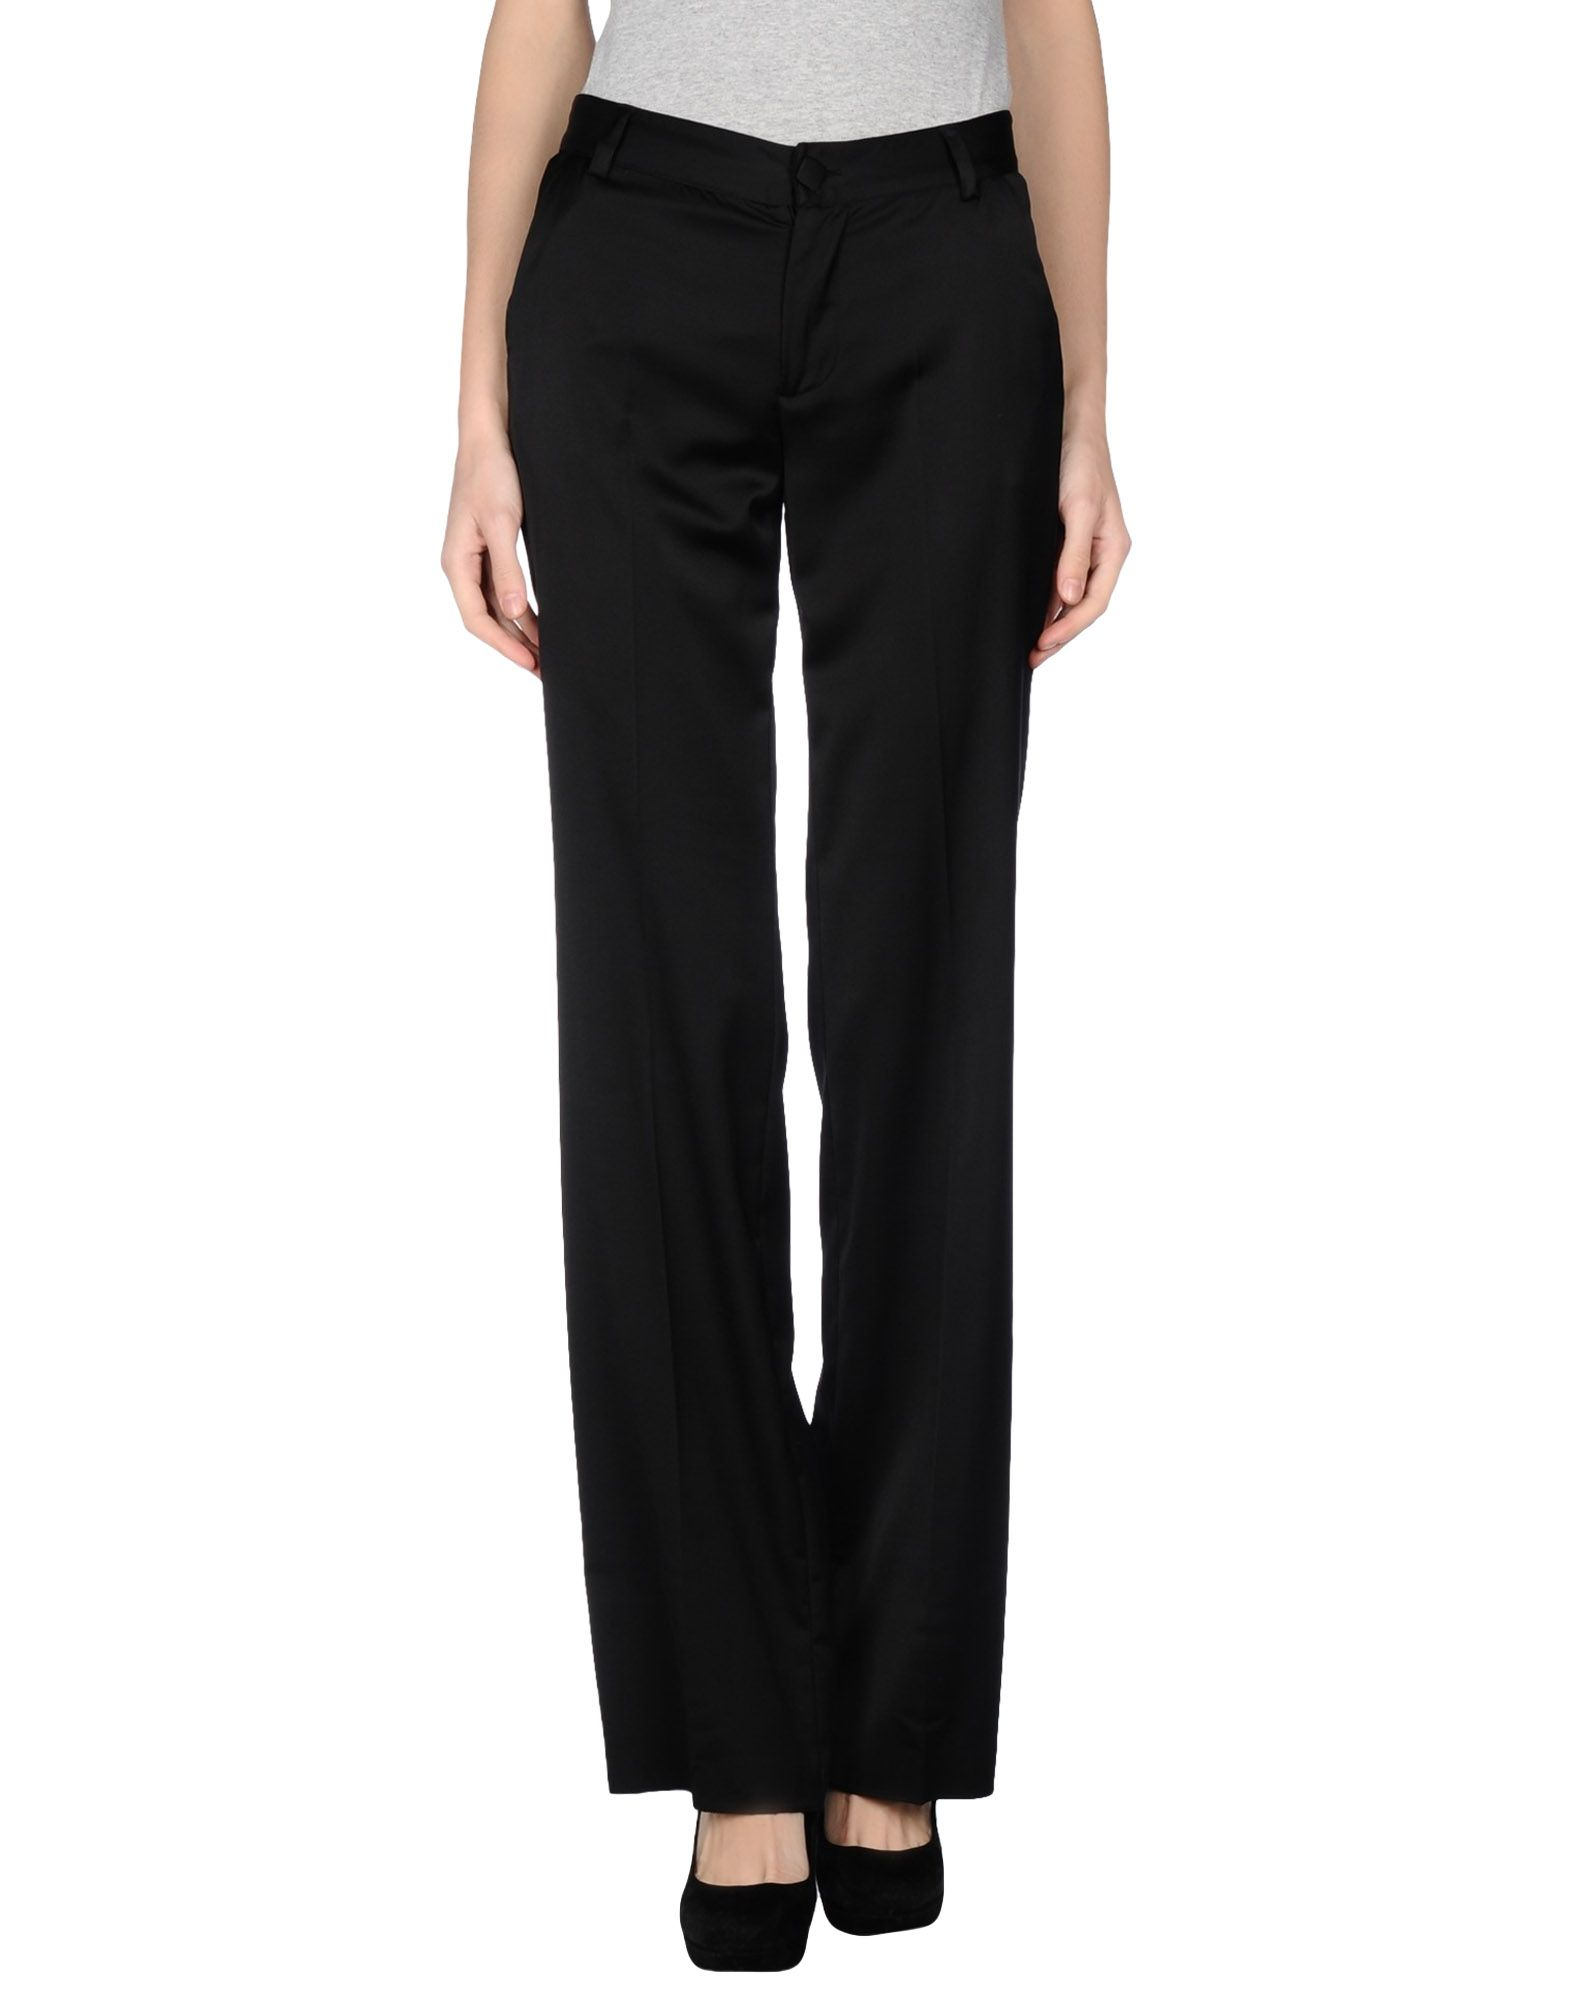 Lyst - Versace Jeans Casual Trouser in Black